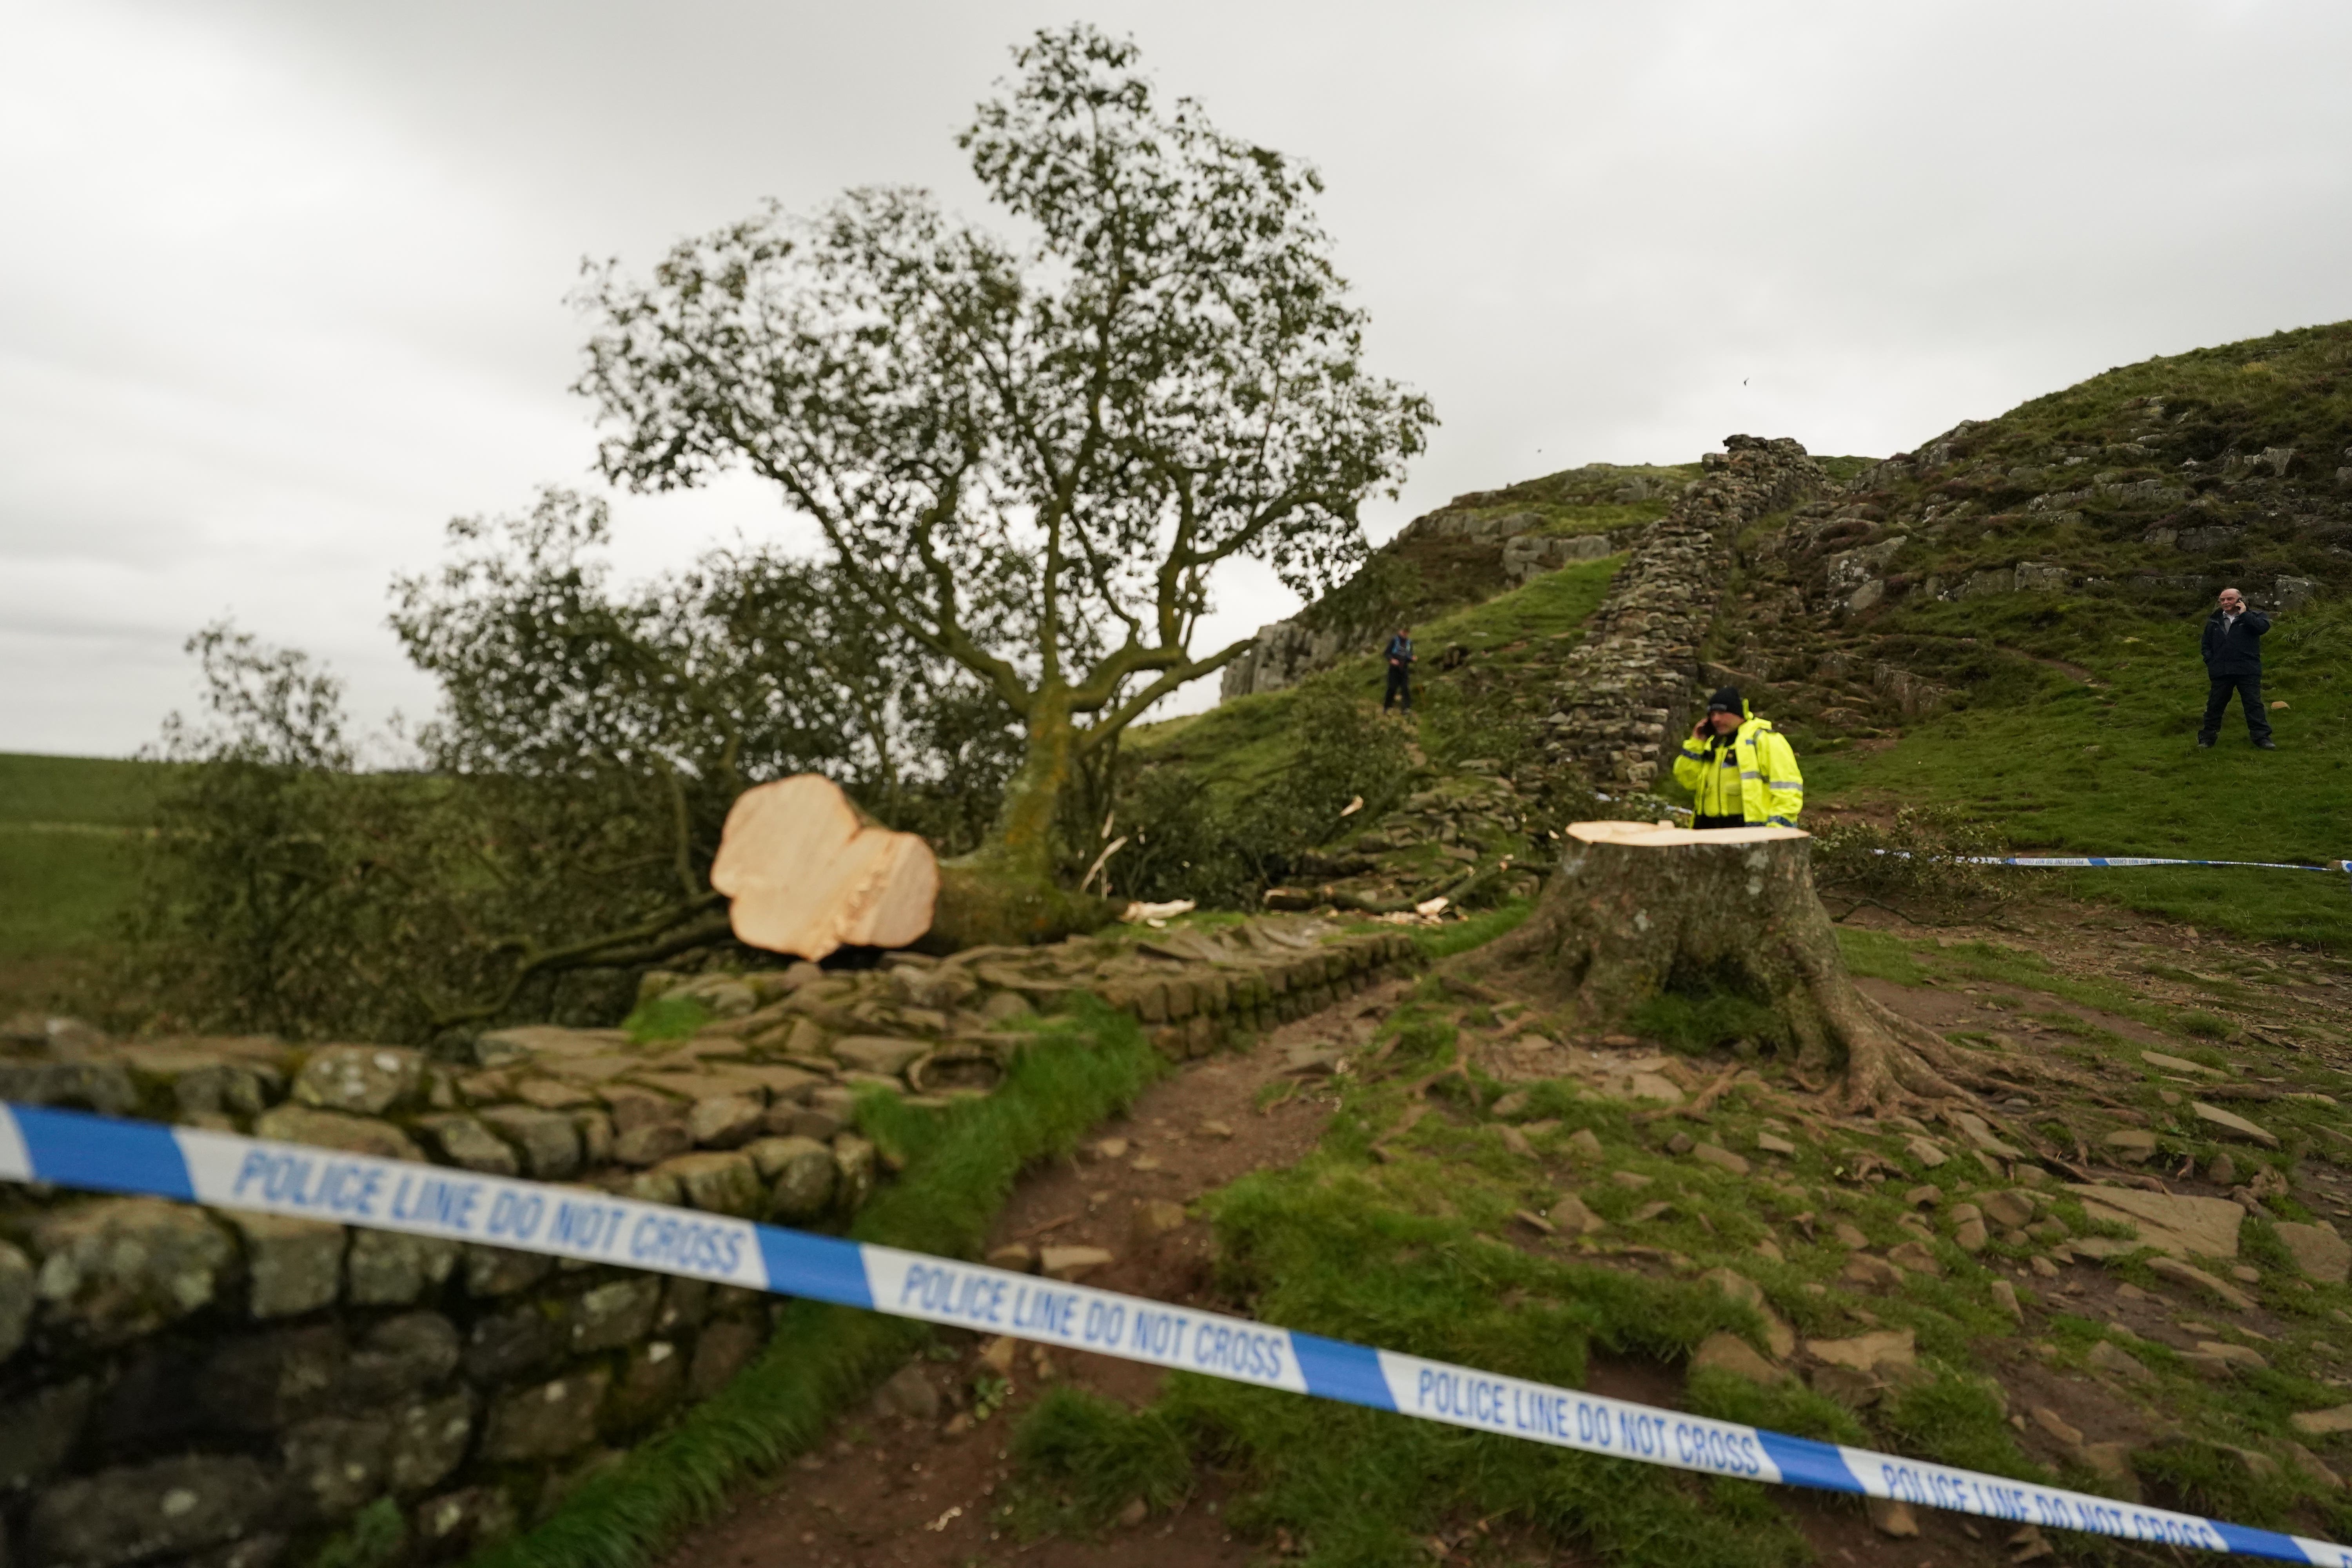 Police investigations are continuing into how the famous tree at Sycamore Gap came to be felled